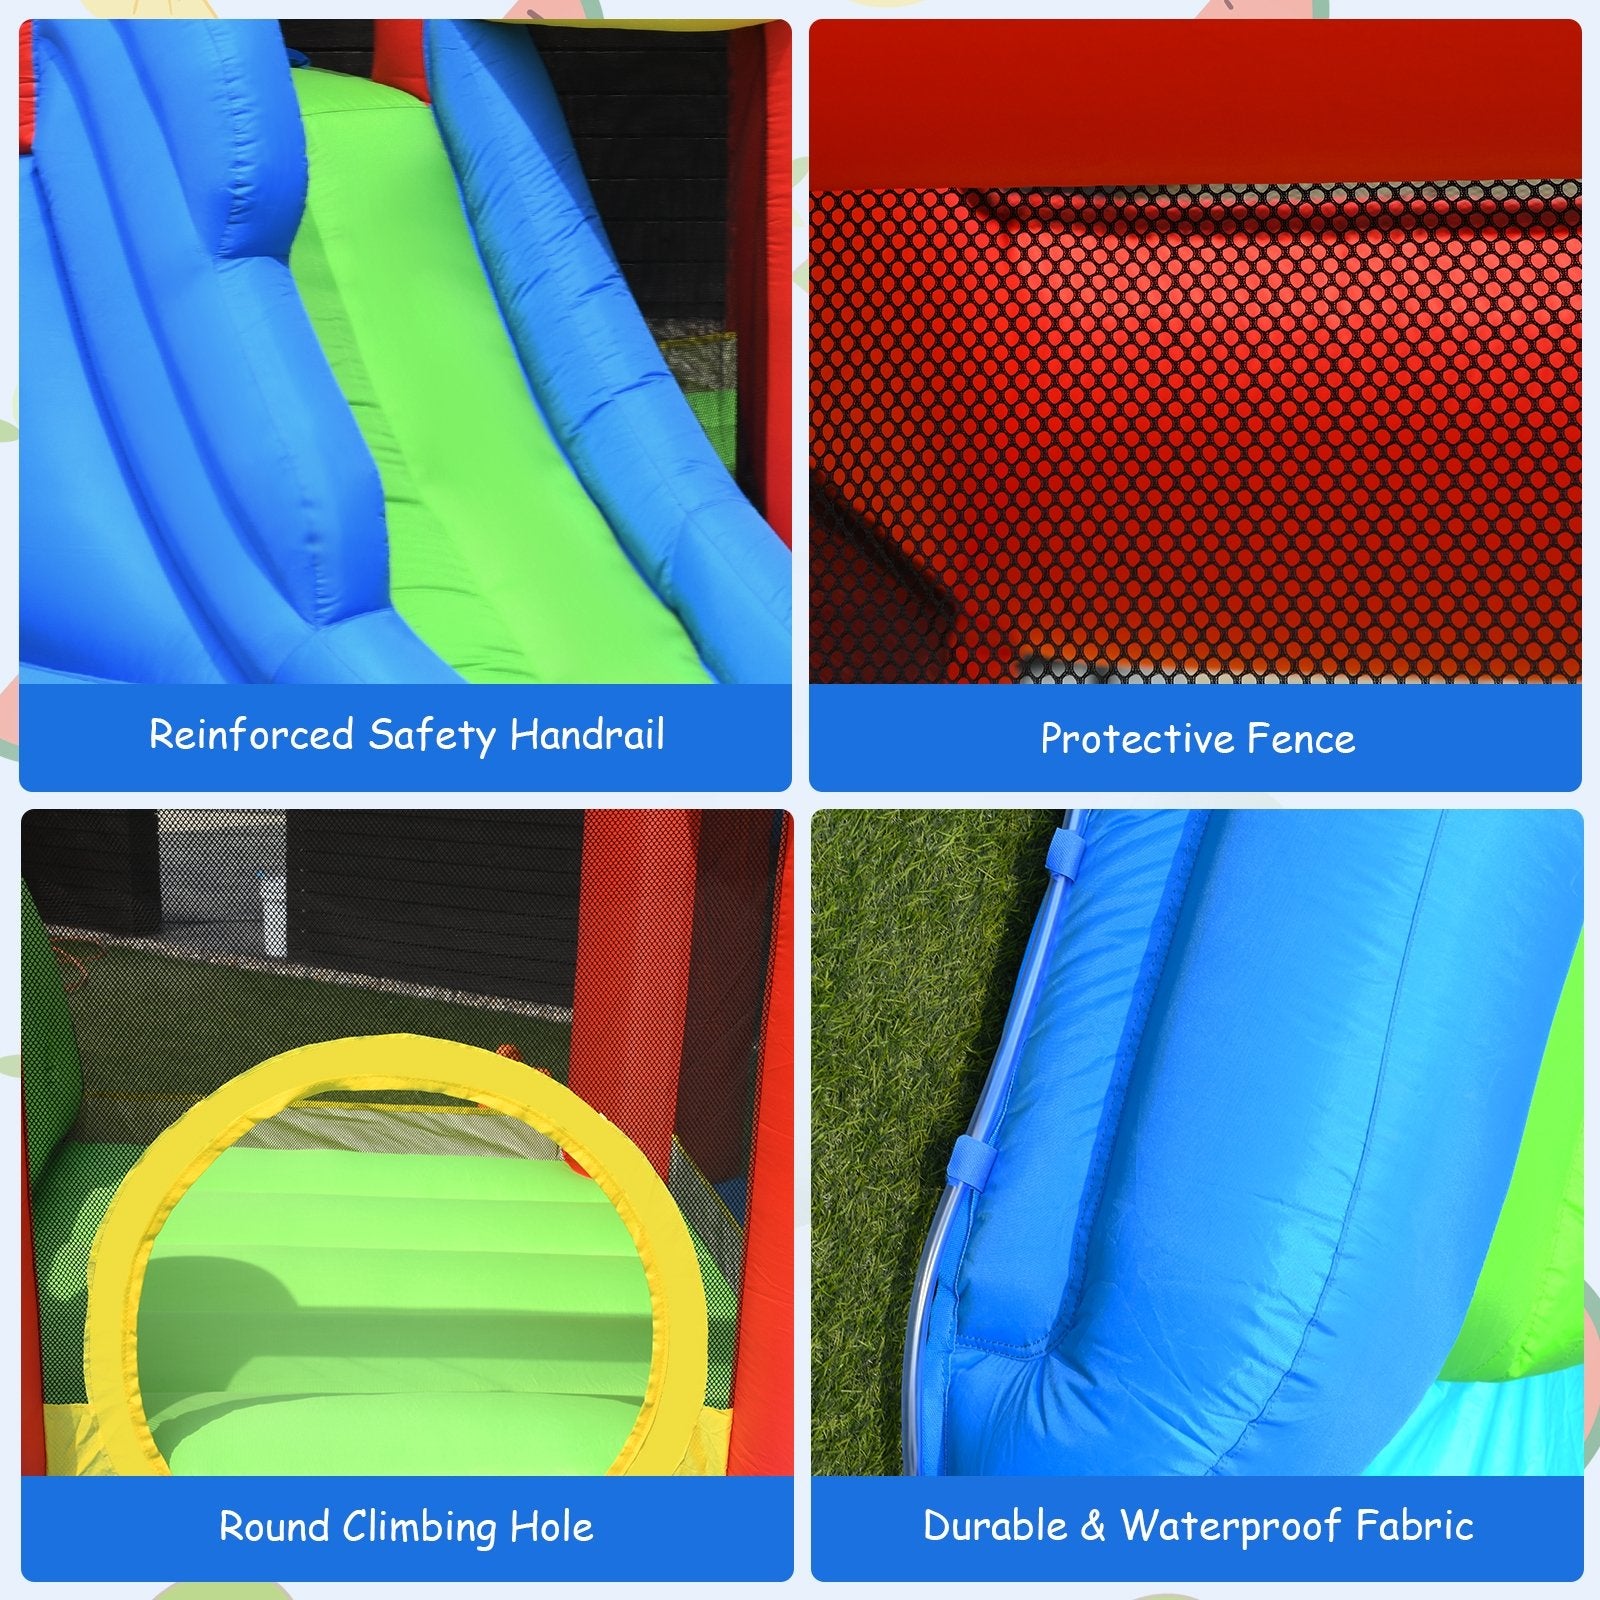 Inflatable Bounce House Splash Pool with Water Climb Slide Blower Included at Gallery Canada